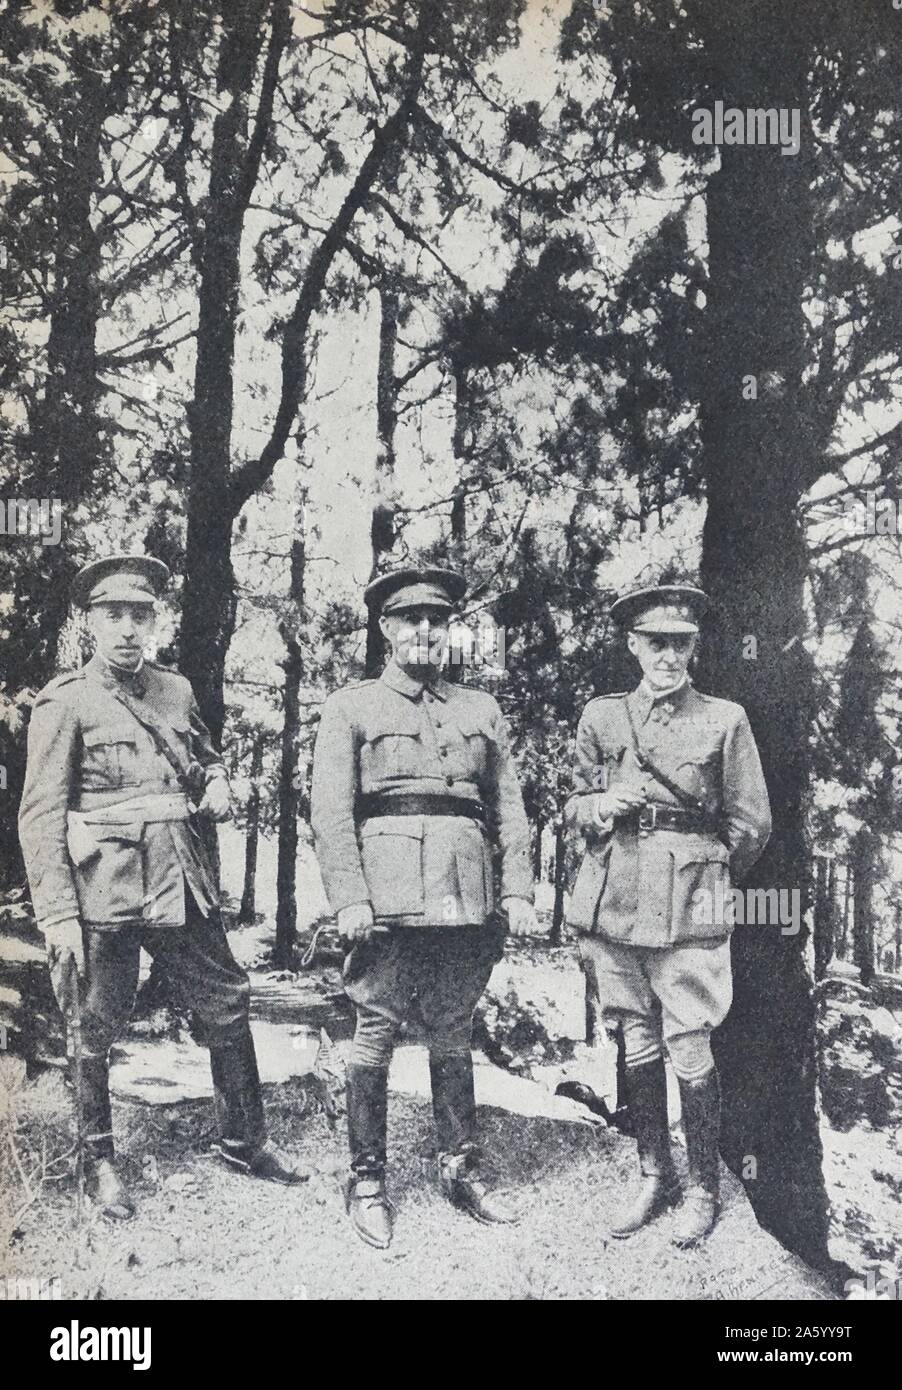 Francisco Franco 1892 – 1975, dictator of Spain meets with key officers General Caceres and General pearl, in a forest, at the start of the Spanish Civil War. Stock Photo